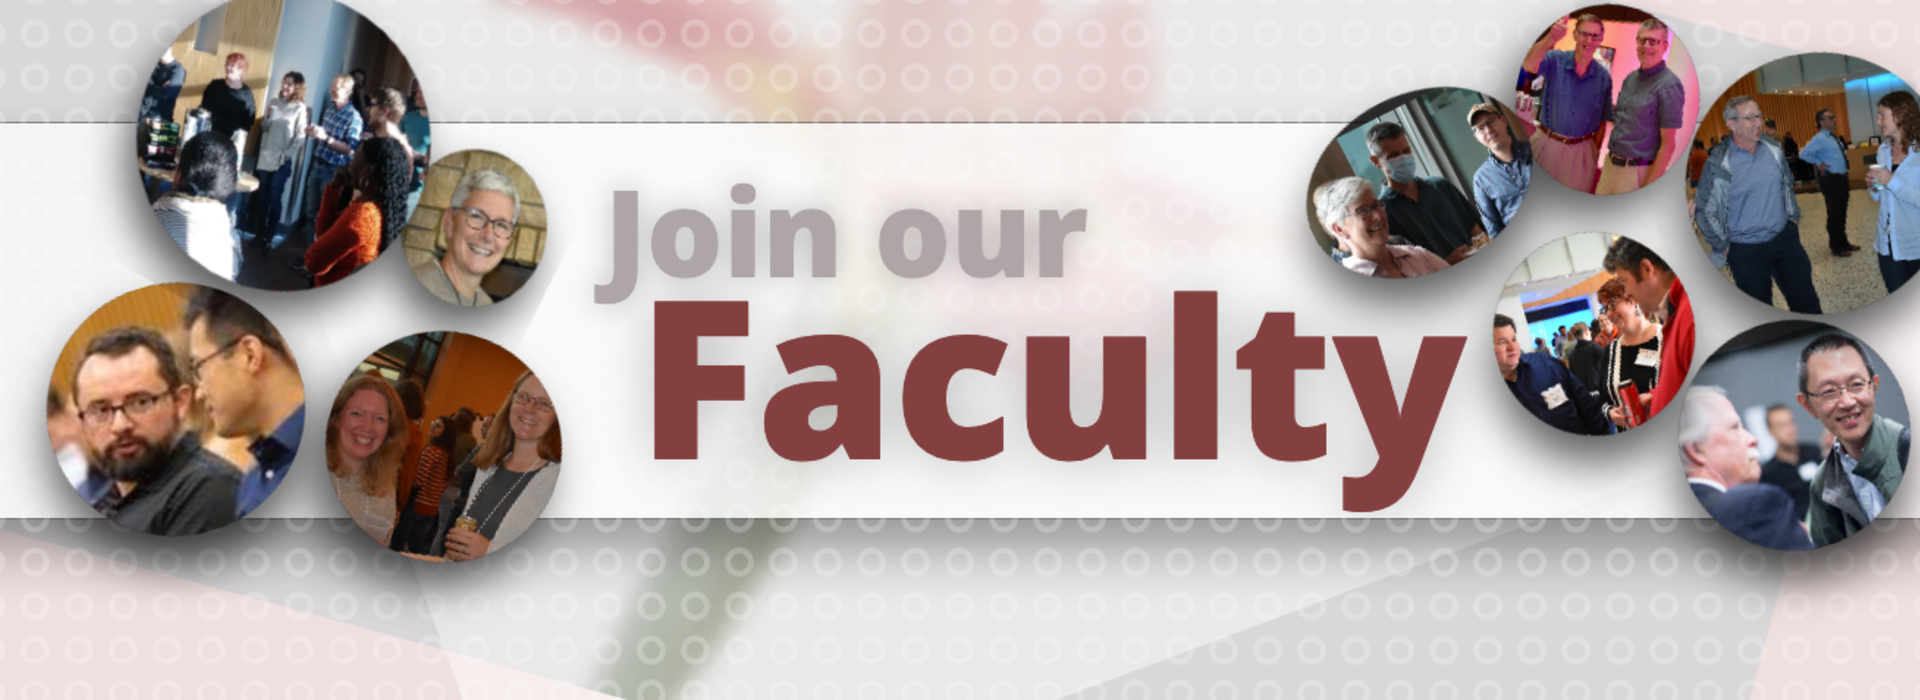 immunology join our faculty